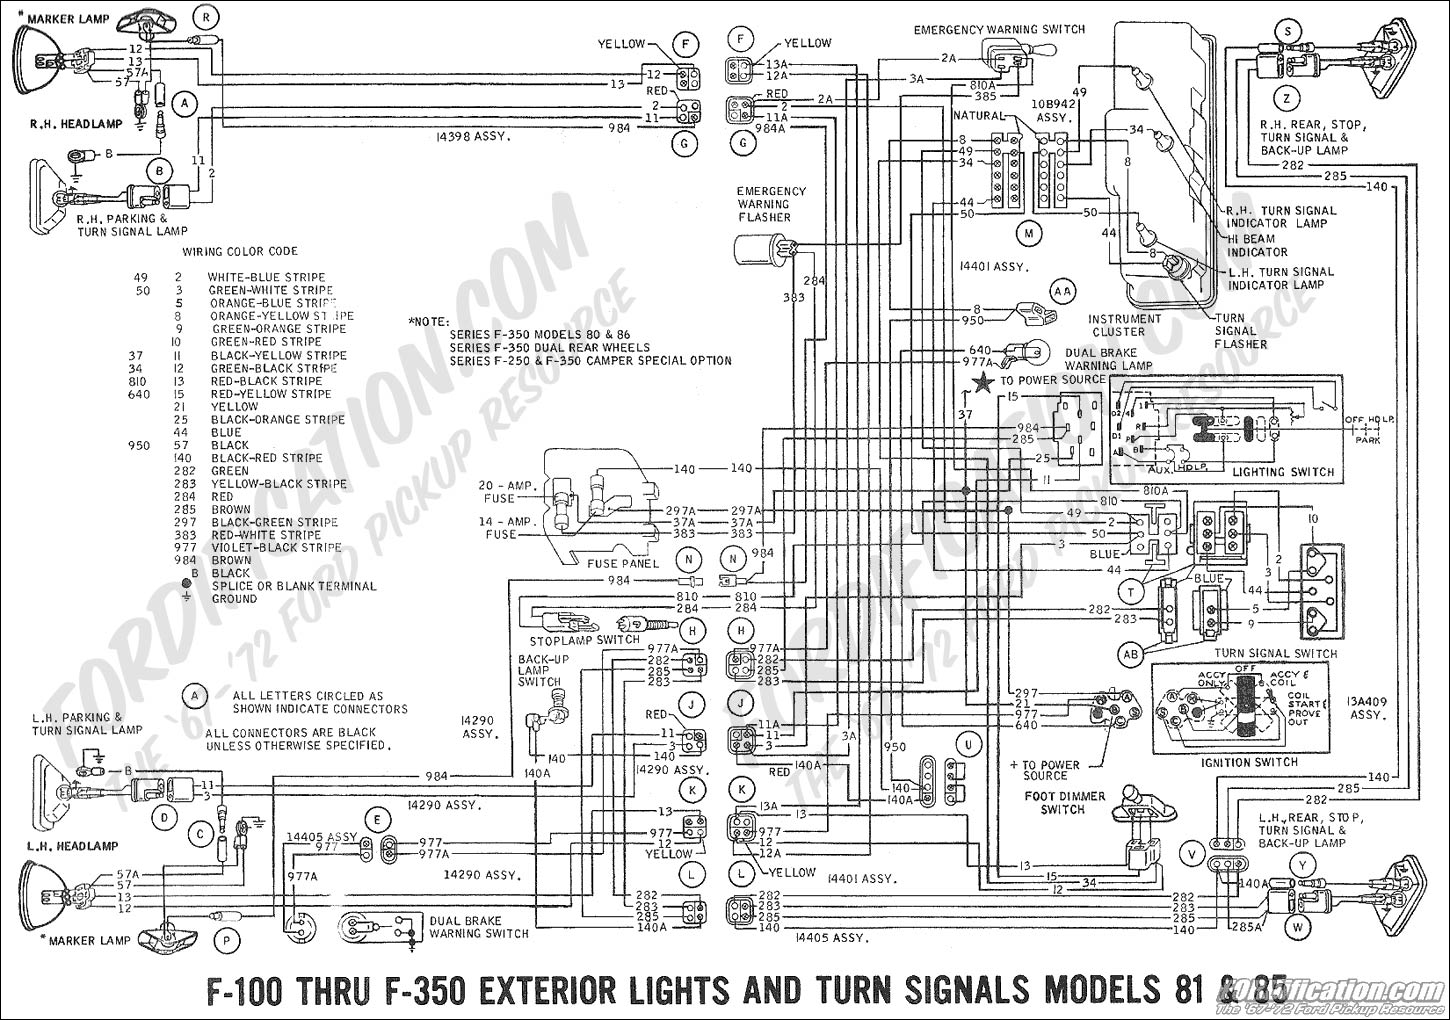 Ford Truck Technical Drawings and Schematics - Section H - Wiring Diagrams  1984 Ford Ranger Turn Signal Wireing Diagram    FORDification.com